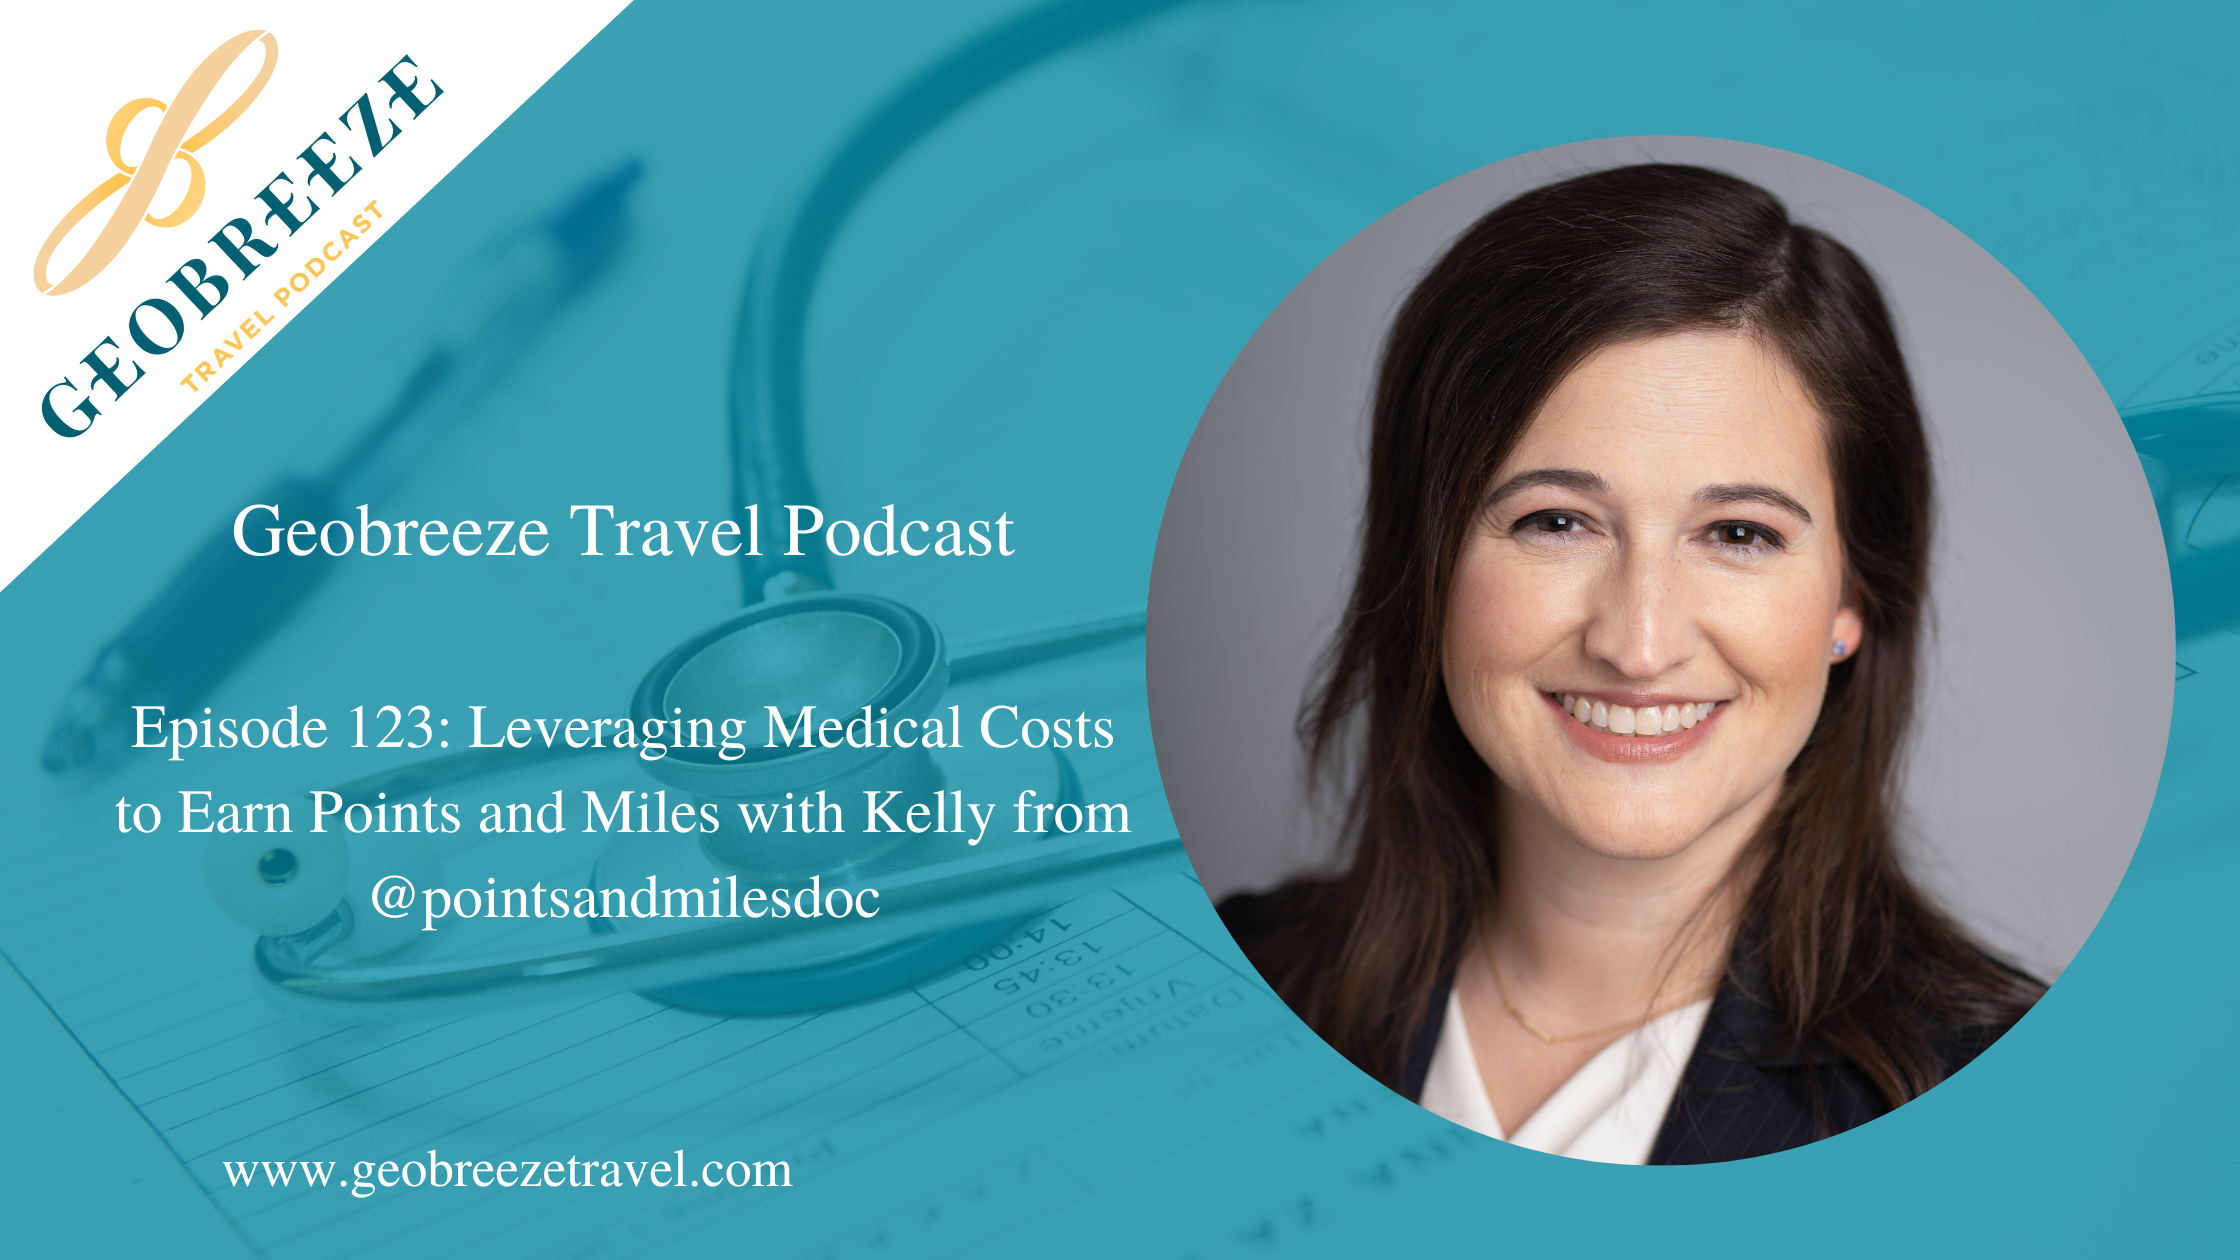 Episode 123: Leveraging Medical Costs to Earn Points and Miles with Kelly from @pointsandmilesdoc